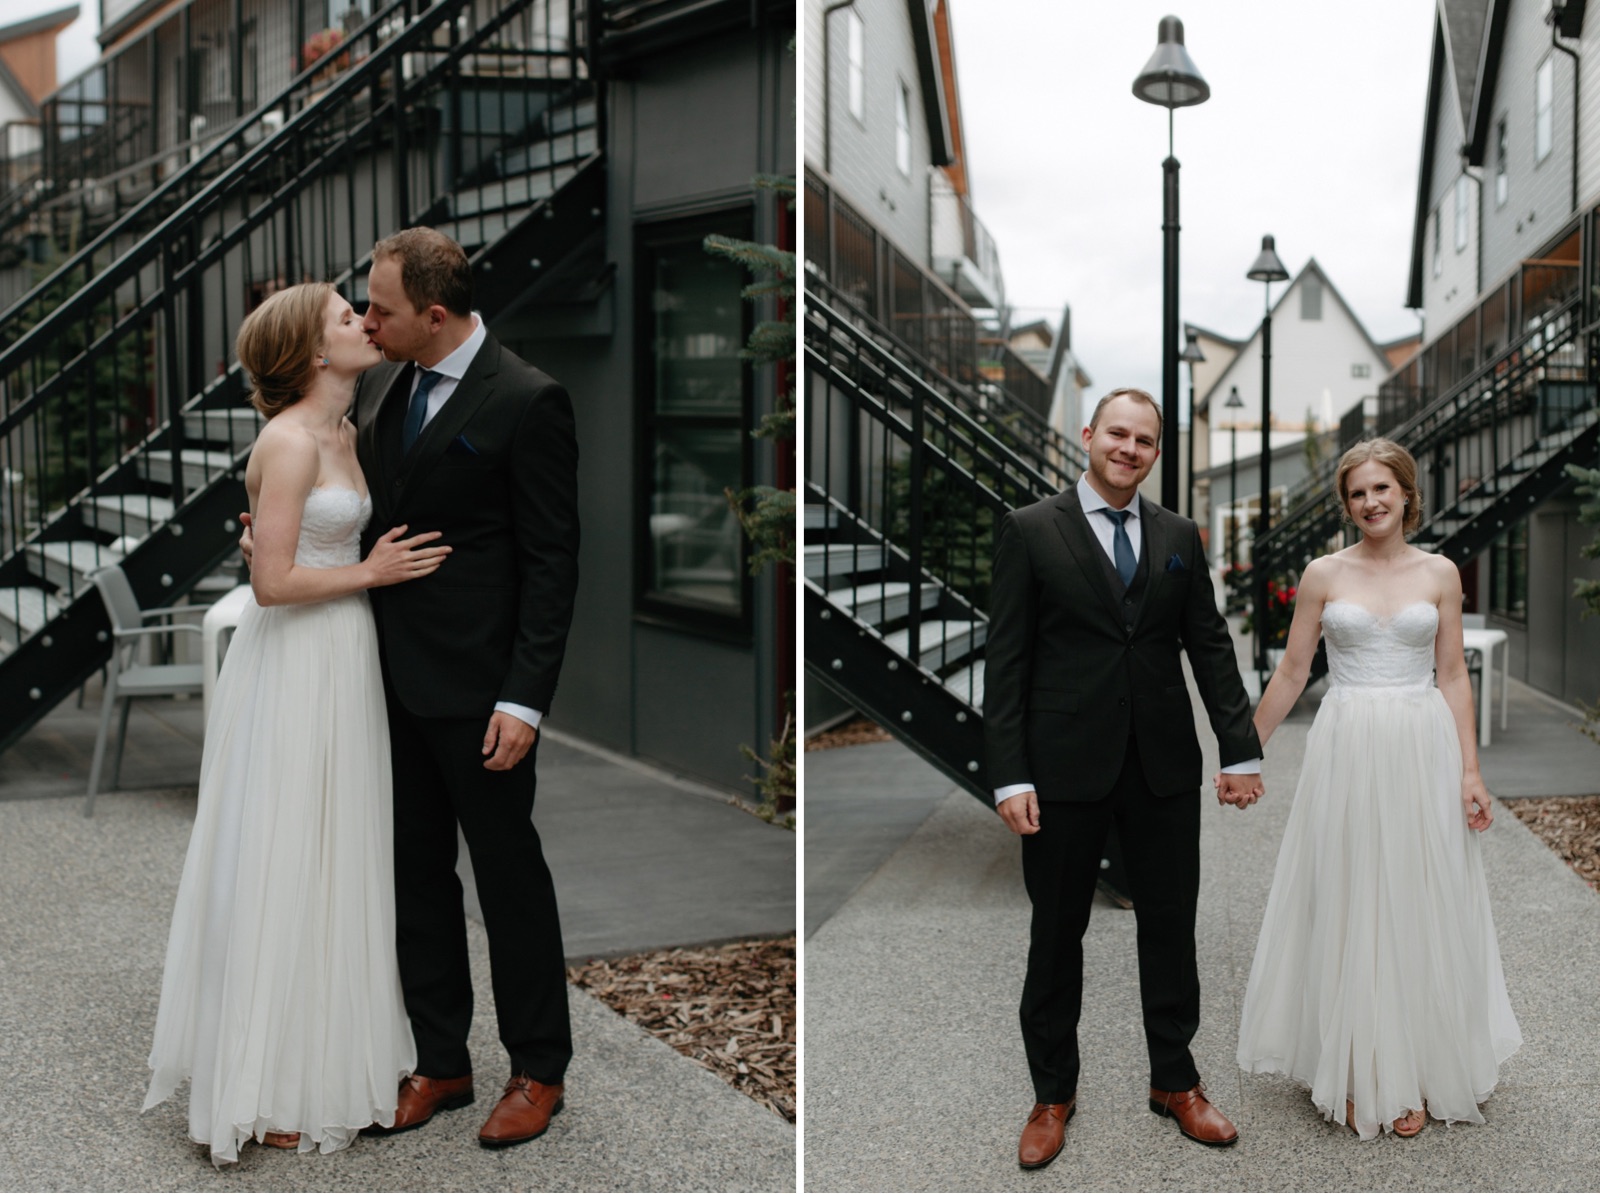 Elopement first look in the courtyard of Basecamp Resorts in Canmore